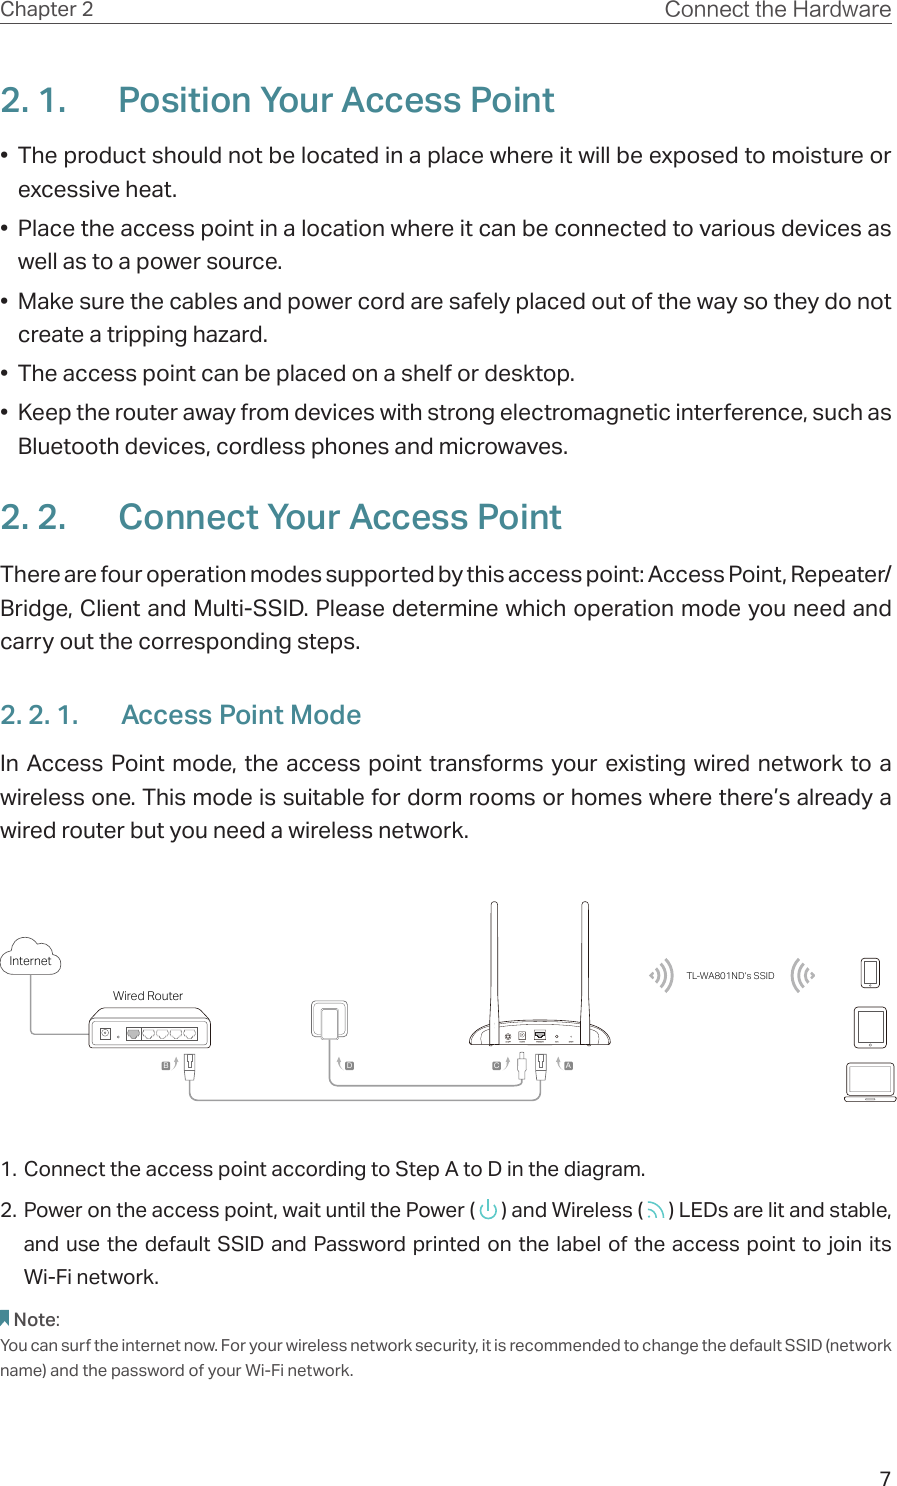 7Chapter 2 Connect the Hardware2. 1.  Position Your Access Point•  The product should not be located in a place where it will be exposed to moisture or excessive heat.•  Place the access point in a location where it can be connected to various devices as well as to a power source.•  Make sure the cables and power cord are safely placed out of the way so they do not create a tripping hazard.•  The access point can be placed on a shelf or desktop.•  Keep the router away from devices with strong electromagnetic interference, such as Bluetooth devices, cordless phones and microwaves.2. 2.  Connect Your Access PointThere are four operation modes supported by this access point: Access Point, Repeater/Bridge, Client and Multi-SSID. Please determine which operation mode you need and carry out the corresponding steps.2. 2. 1.  Access Point ModeIn Access Point mode, the access point transforms your existing wired network to a wireless one. This mode is suitable for dorm rooms or homes where there’s already a wired router but you need a wireless network.Wired RouterInternetTL-WA801ND’s SSIDABCD1. Connect the access point according to Step A to D in the diagram.2. Power on the access point, wait until the Power (   ) and Wireless (   ) LEDs are lit and stable, and use the default SSID and Password printed on the label of the access point to join its  Wi-Fi network.Note:You can surf the internet now. For your wireless network security, it is recommended to change the default SSID (network name) and the password of your Wi-Fi network.